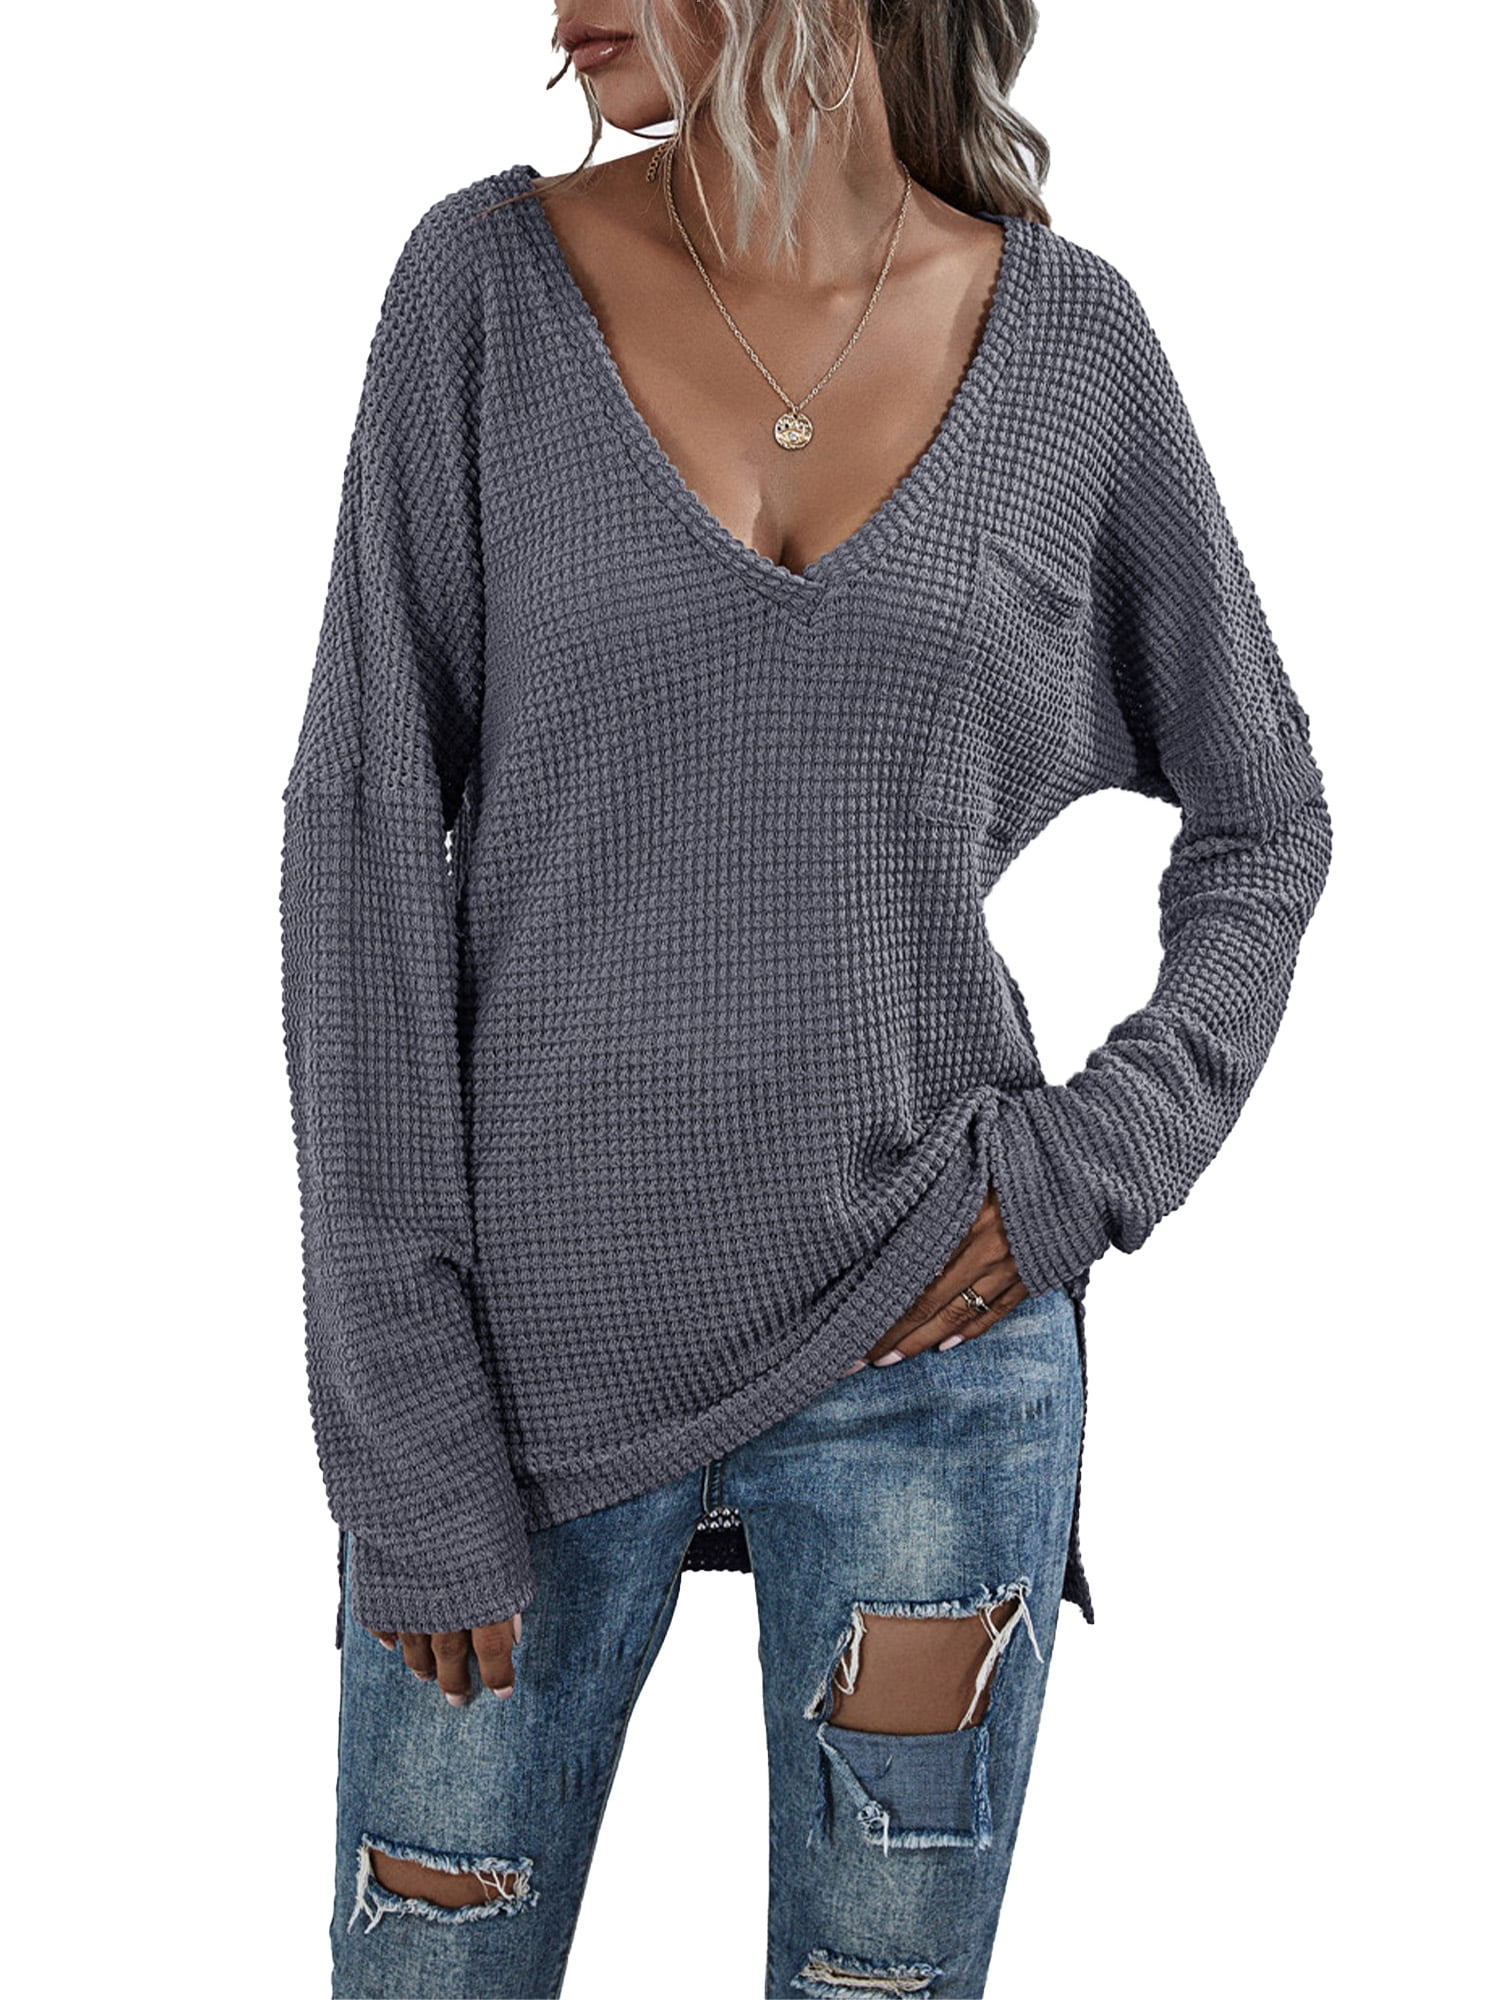 ICE Cream Fashion Women Casual V-Neck Tie Knit Loose Long Sleeve T-Shirt Blouse Tops